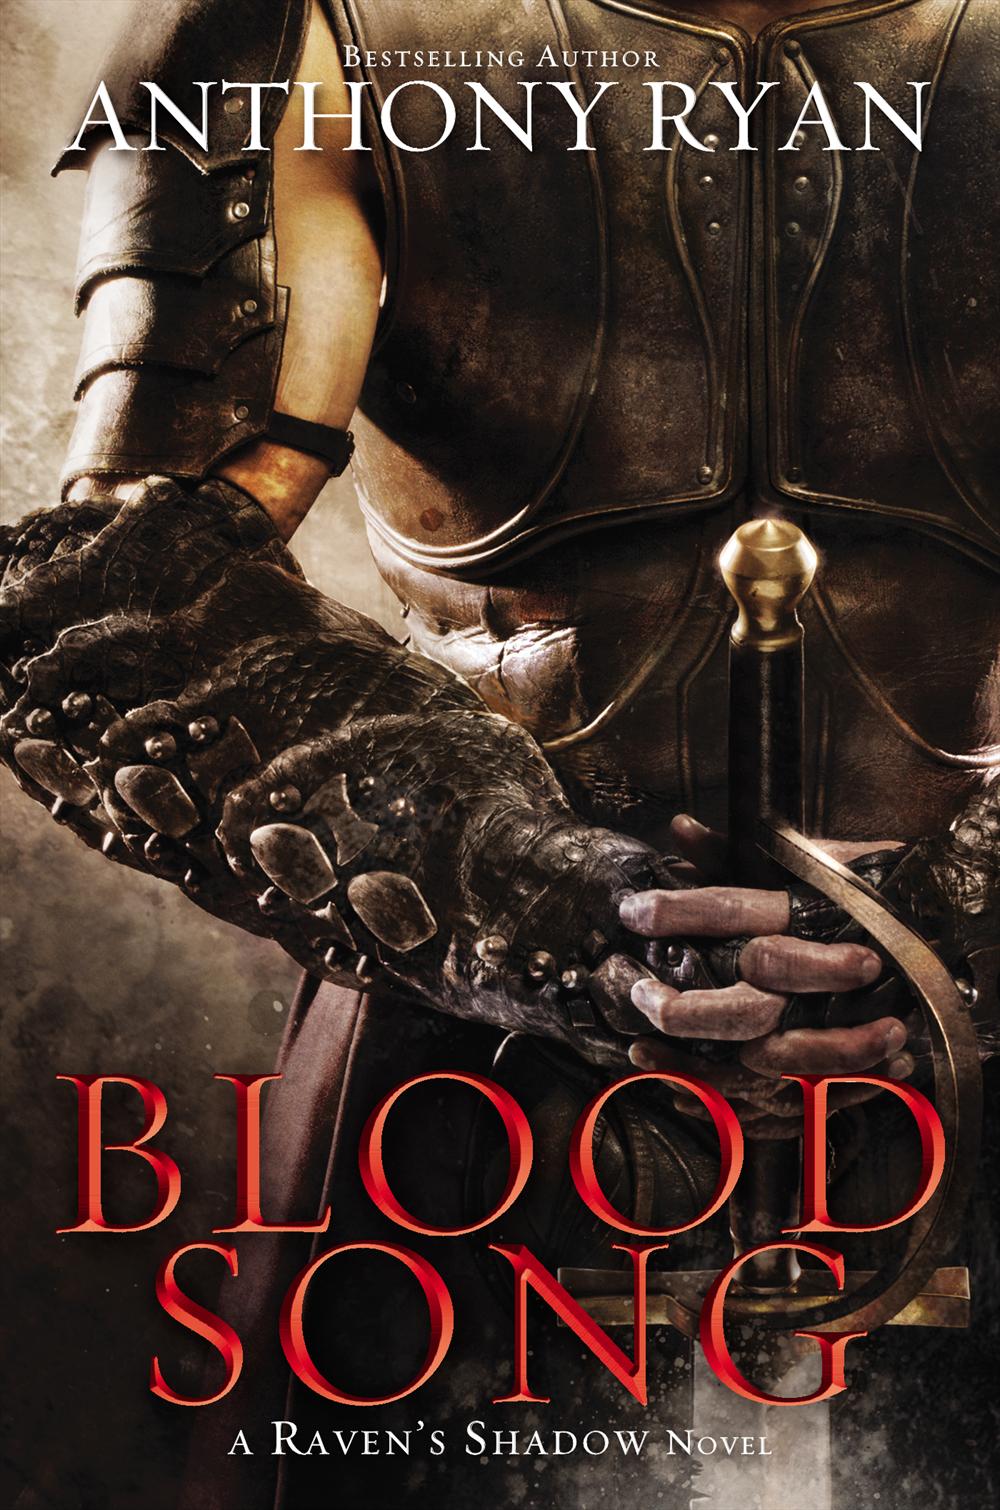 Blood Song: A Raven's Shadow Novel